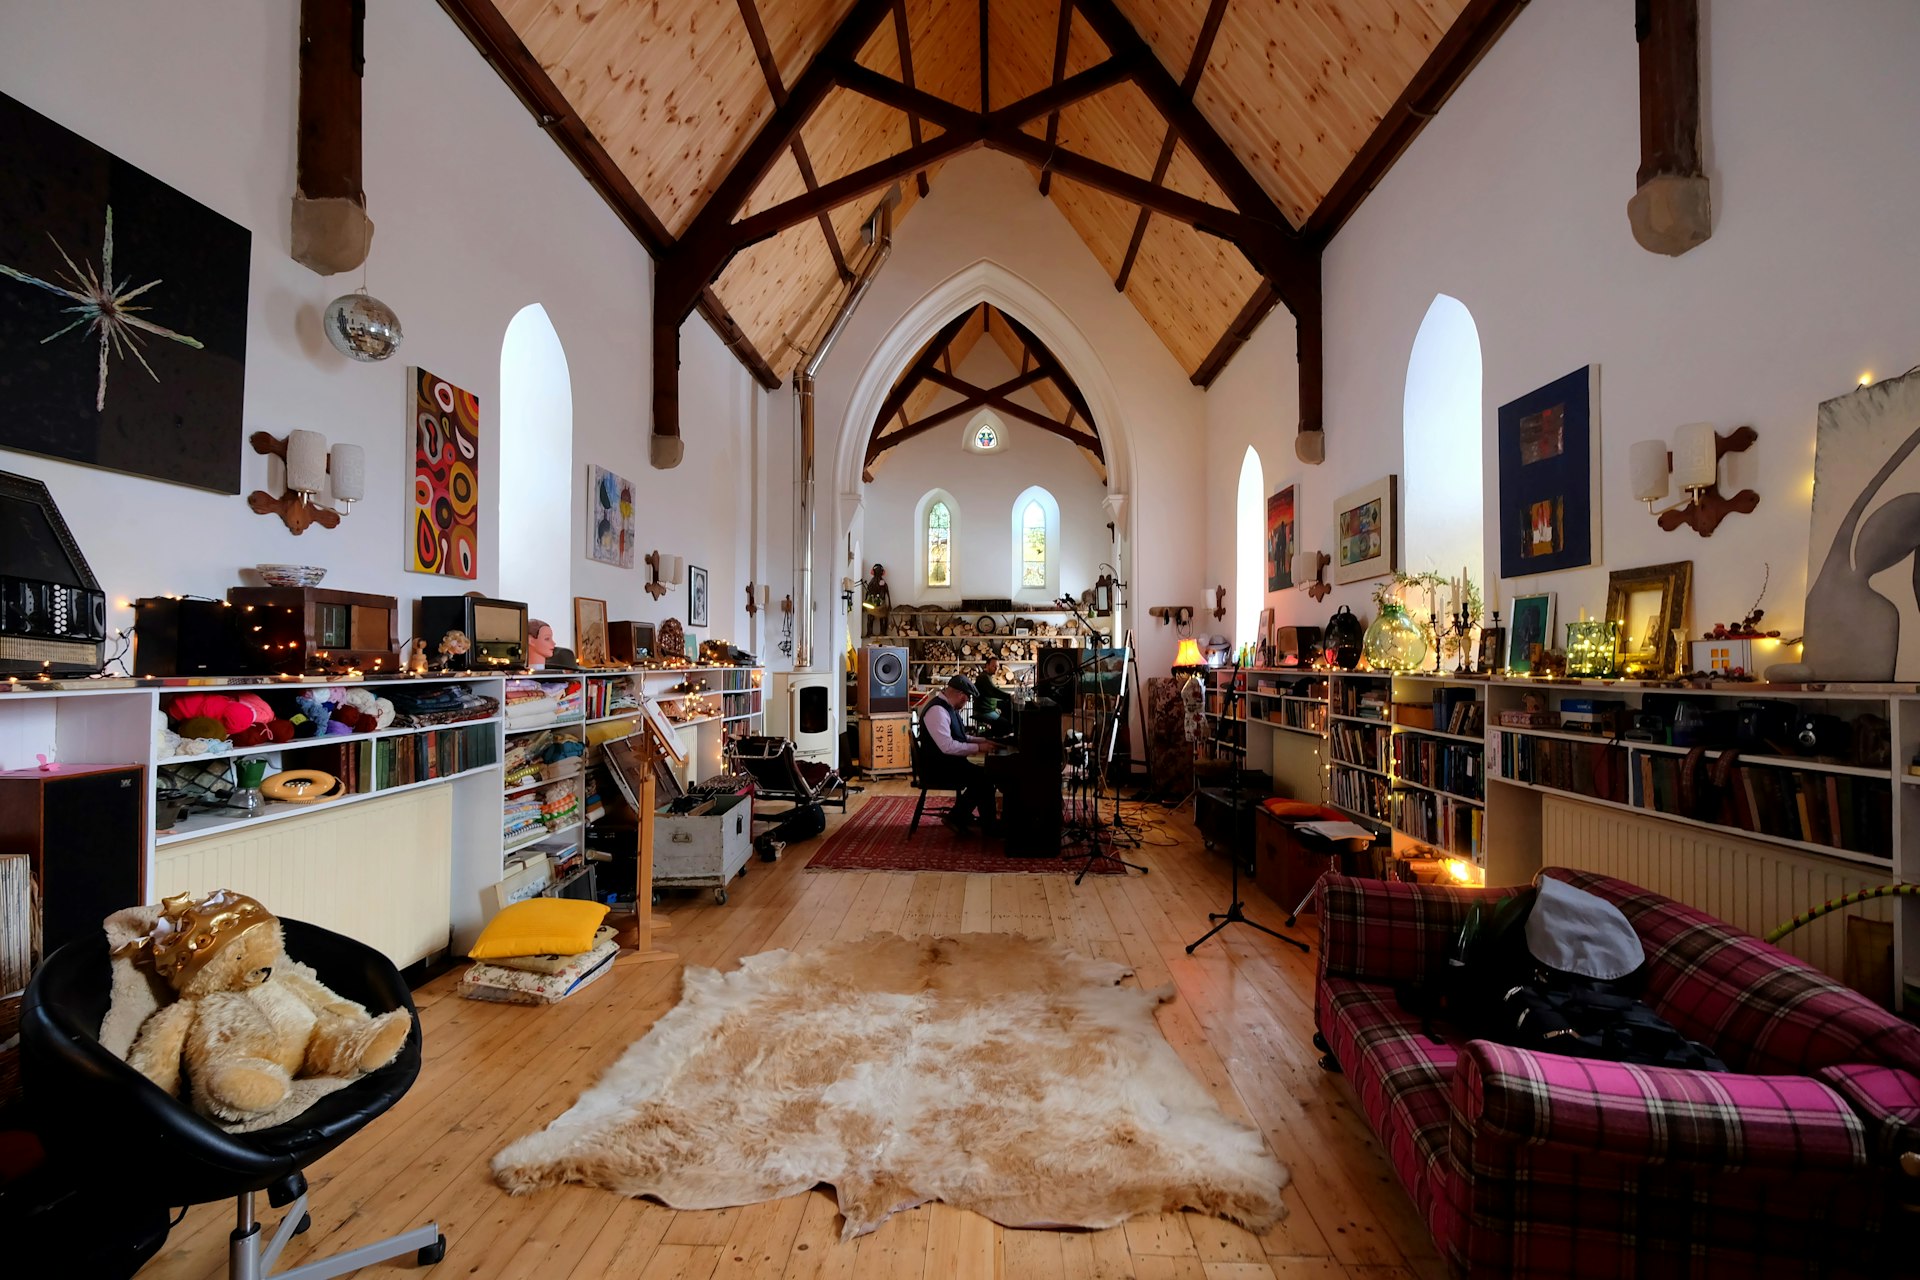 The interior of the converted St Mary's Church in Argyll; it has vaulted ceilings, and is kitted out with soft furnishings and recording equipment.